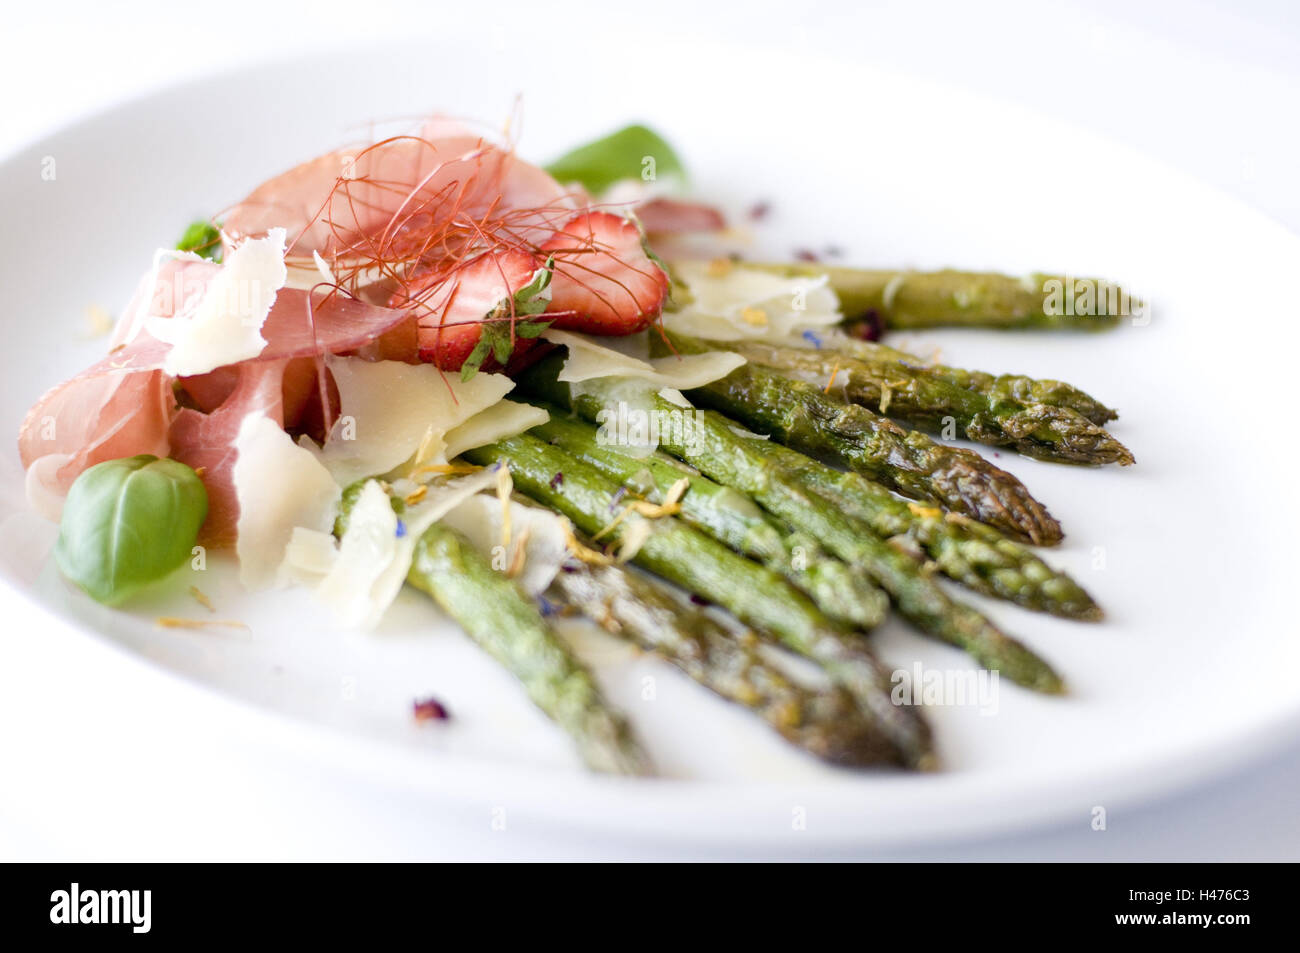 Food, hors-d'oeuvre, green asparagus with ham and parmesan cheese, Stock Photo